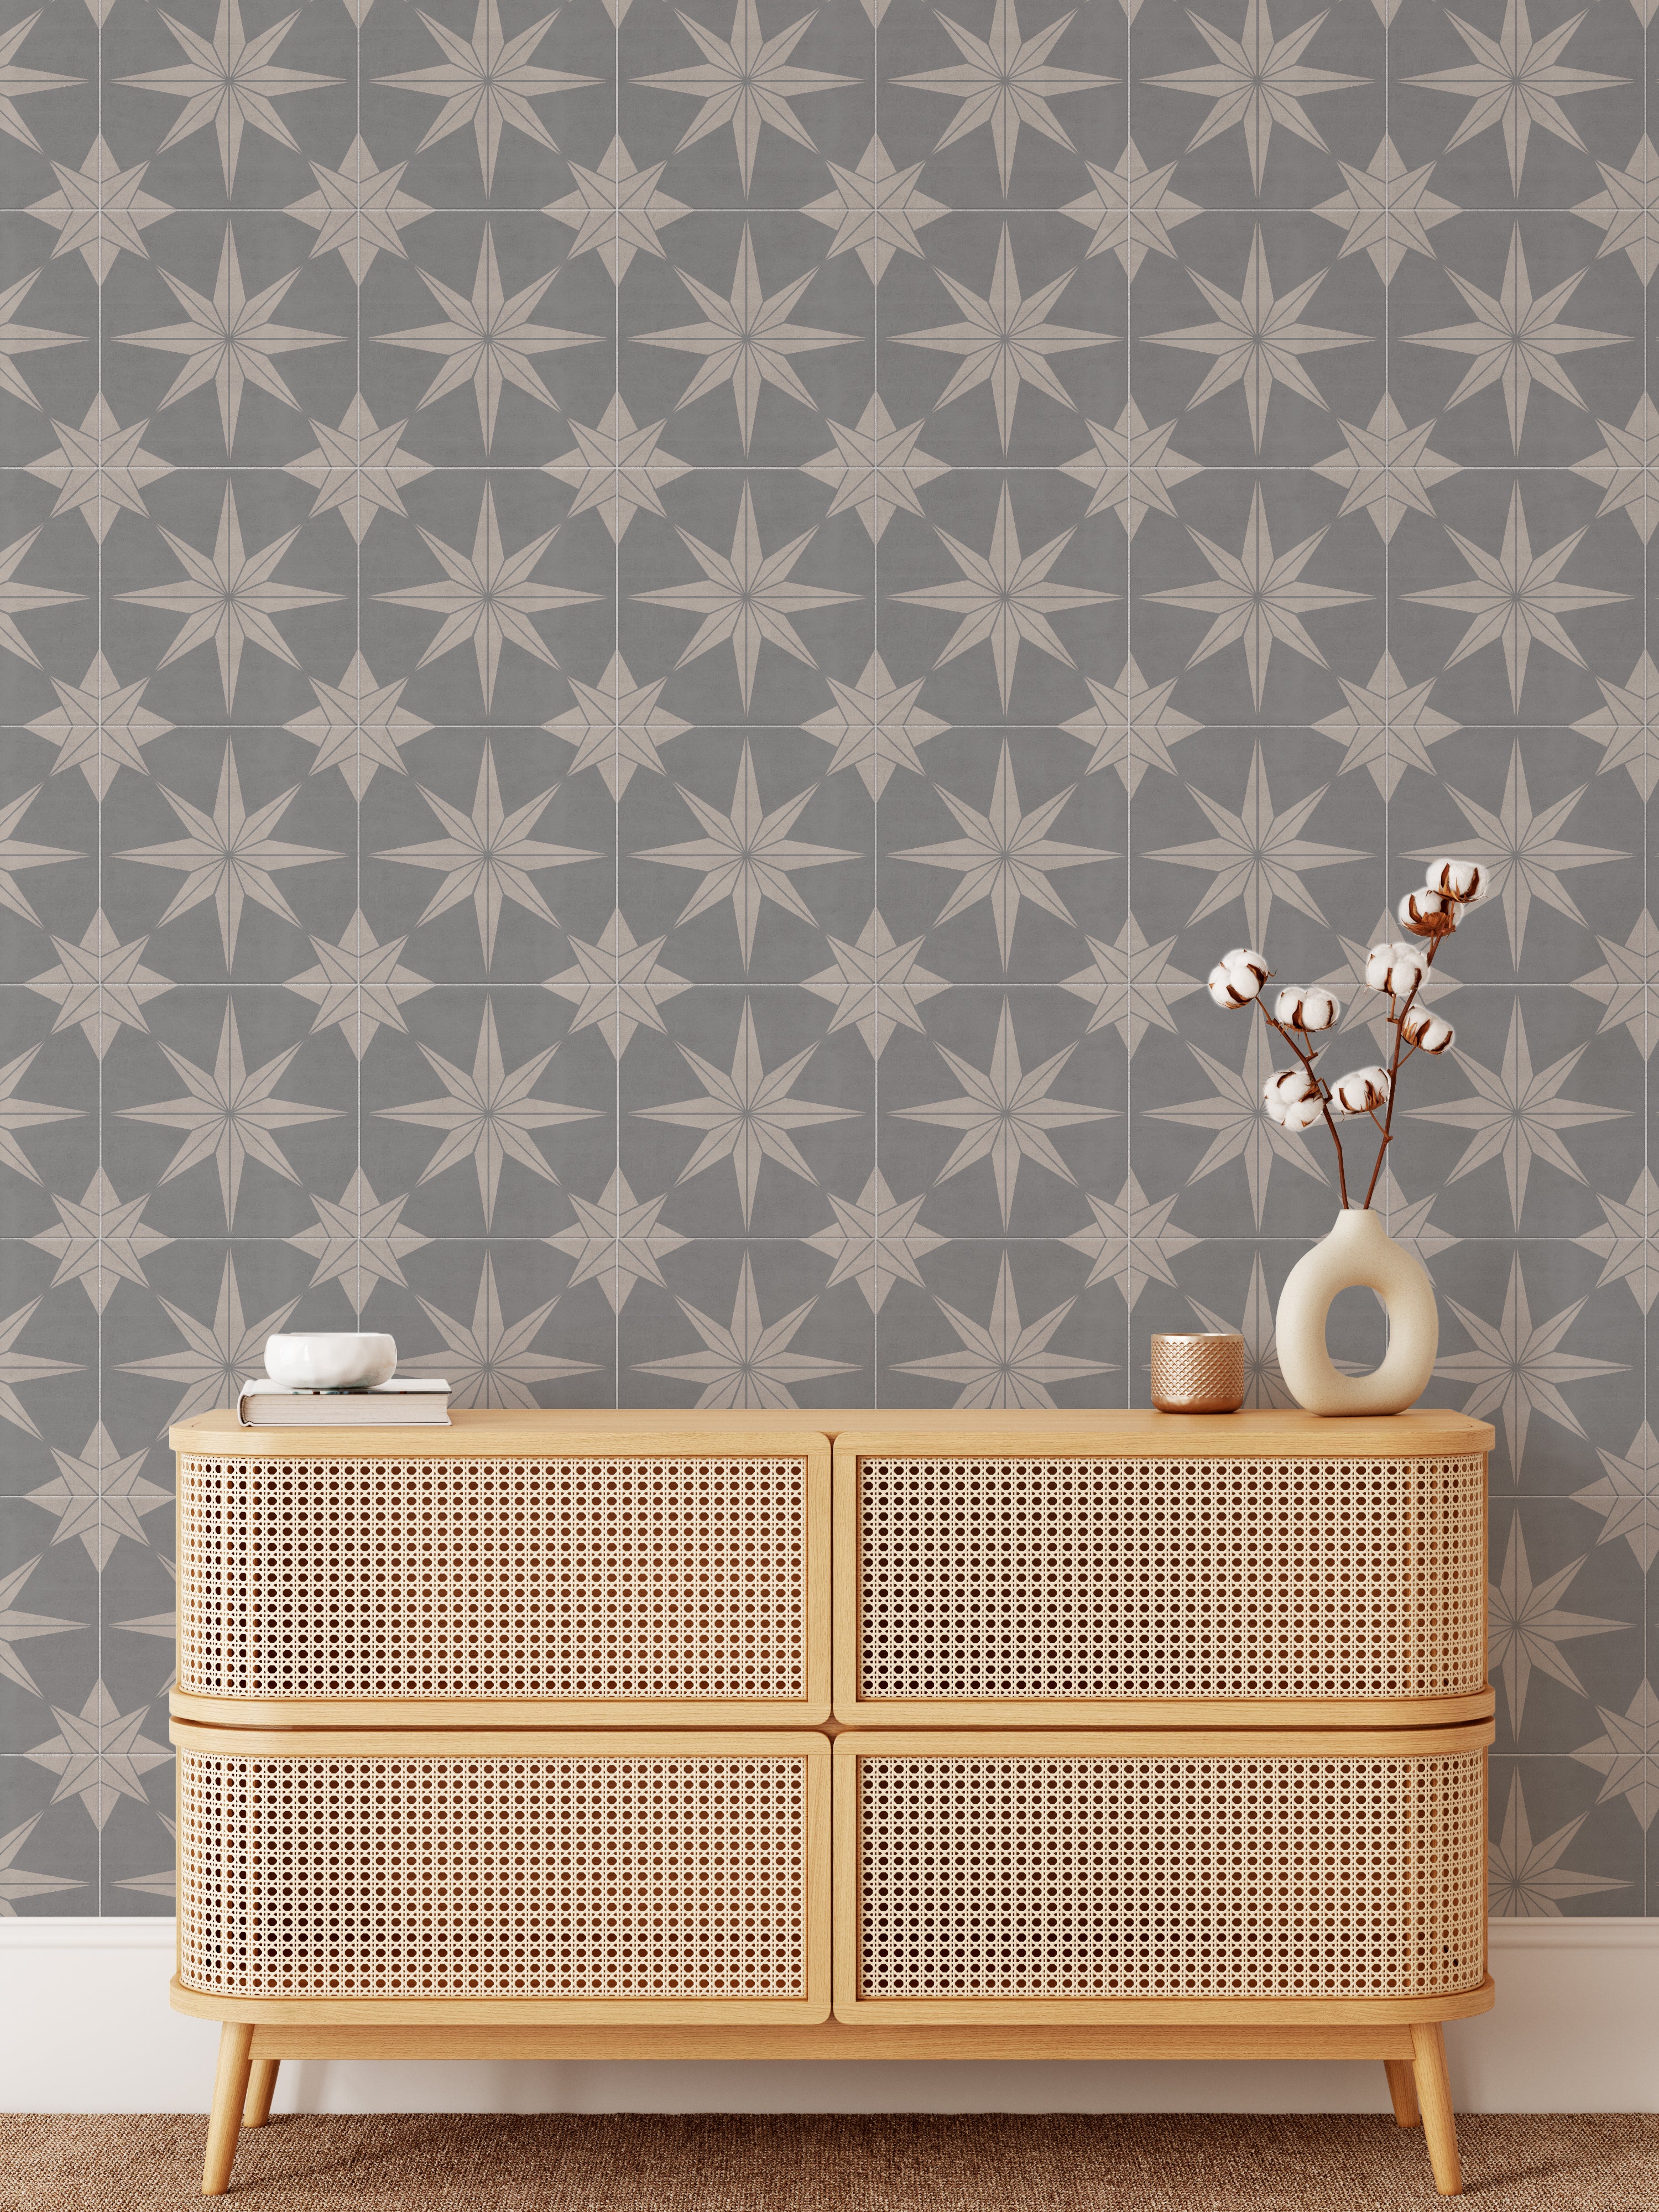 Reality Star (Blue) Wallpaper Wallpaper - The Tamra Judge Line from WALL BLUSH